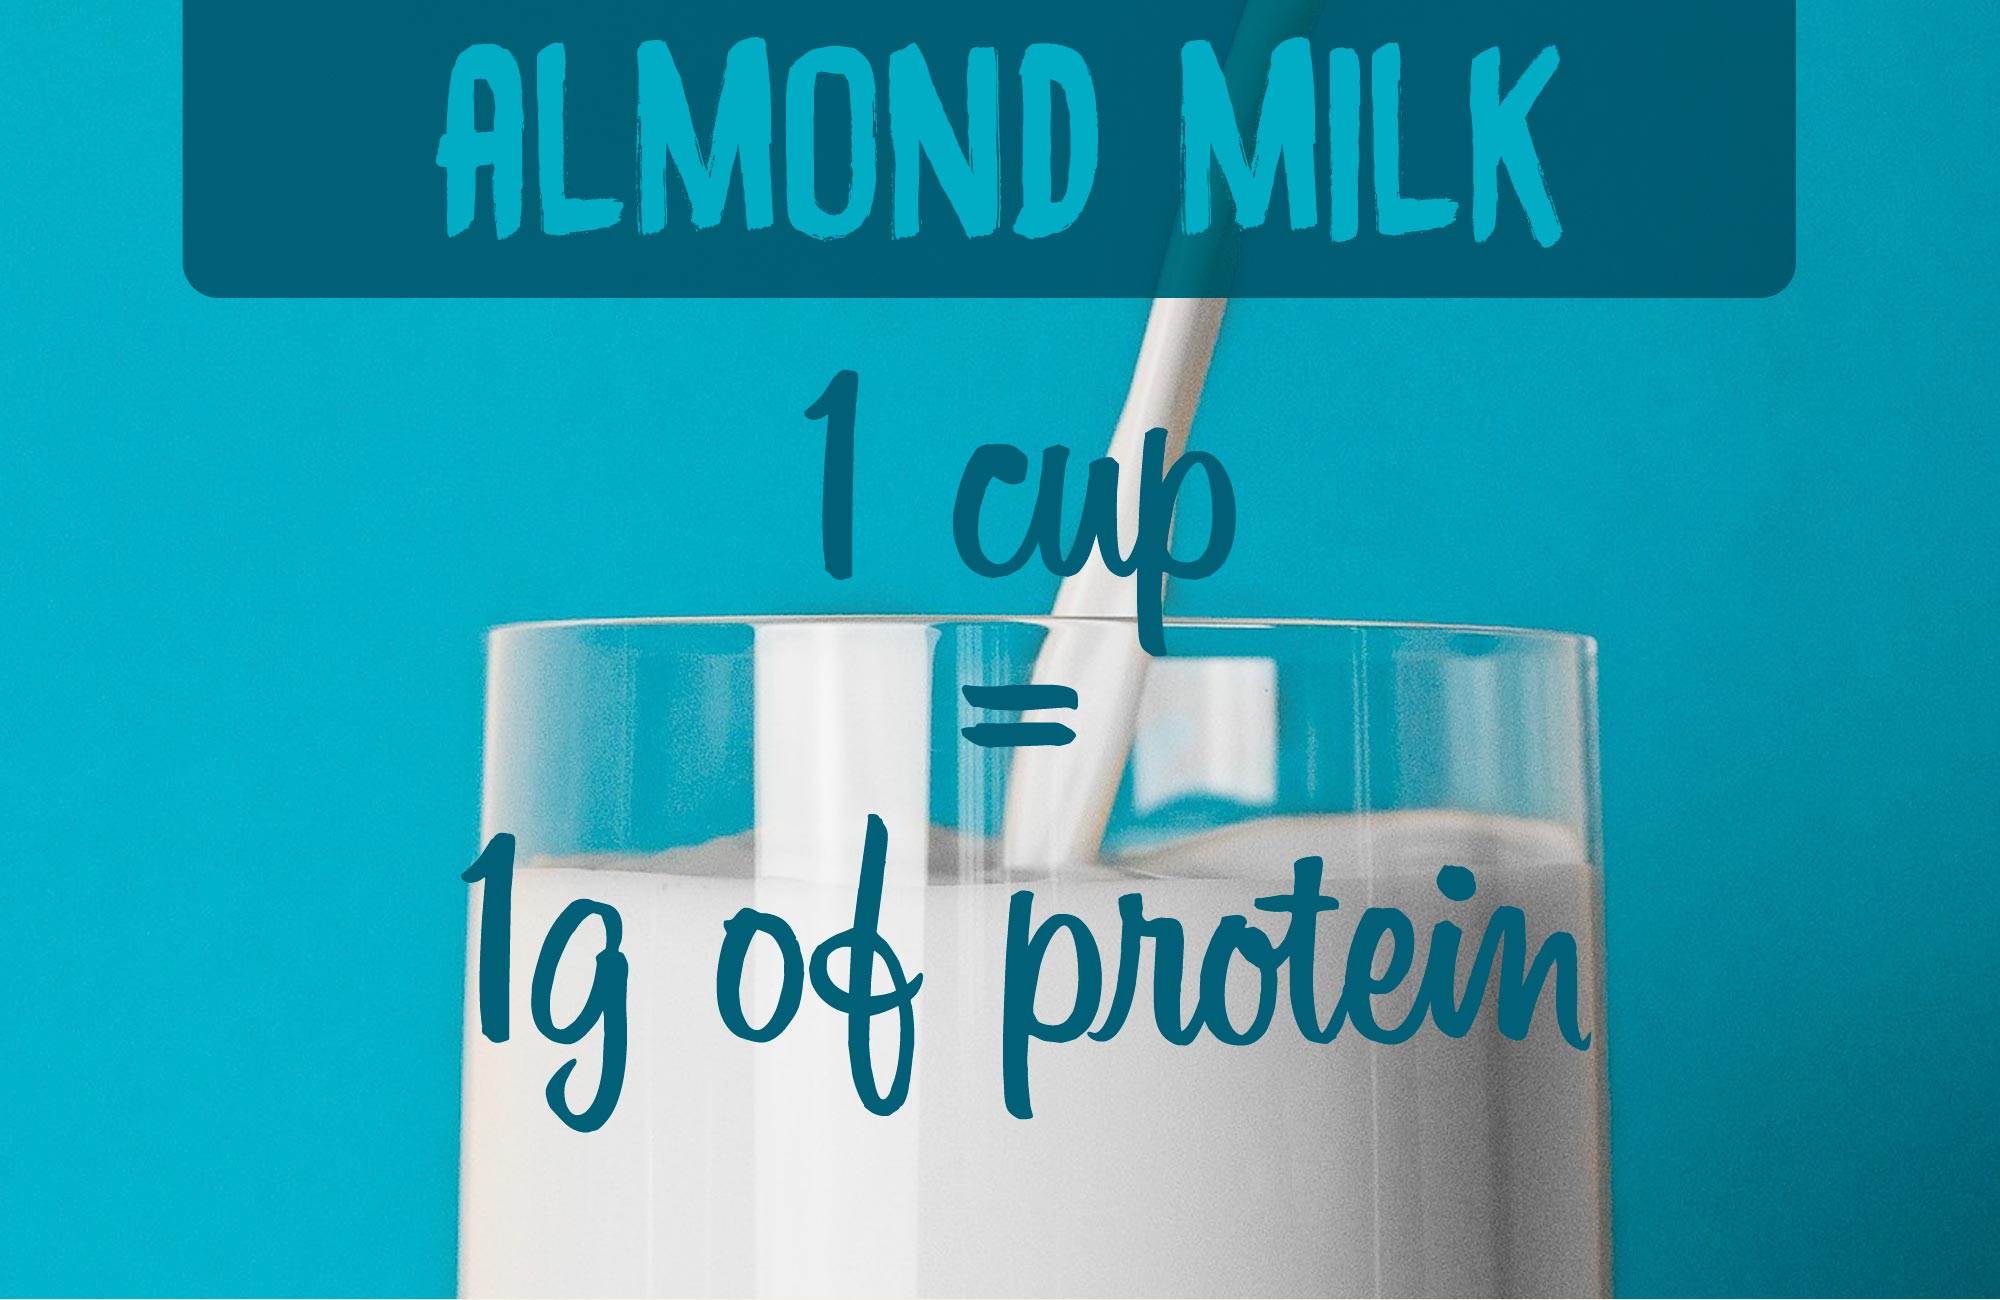 One cup of almond milk contains 1g of protein